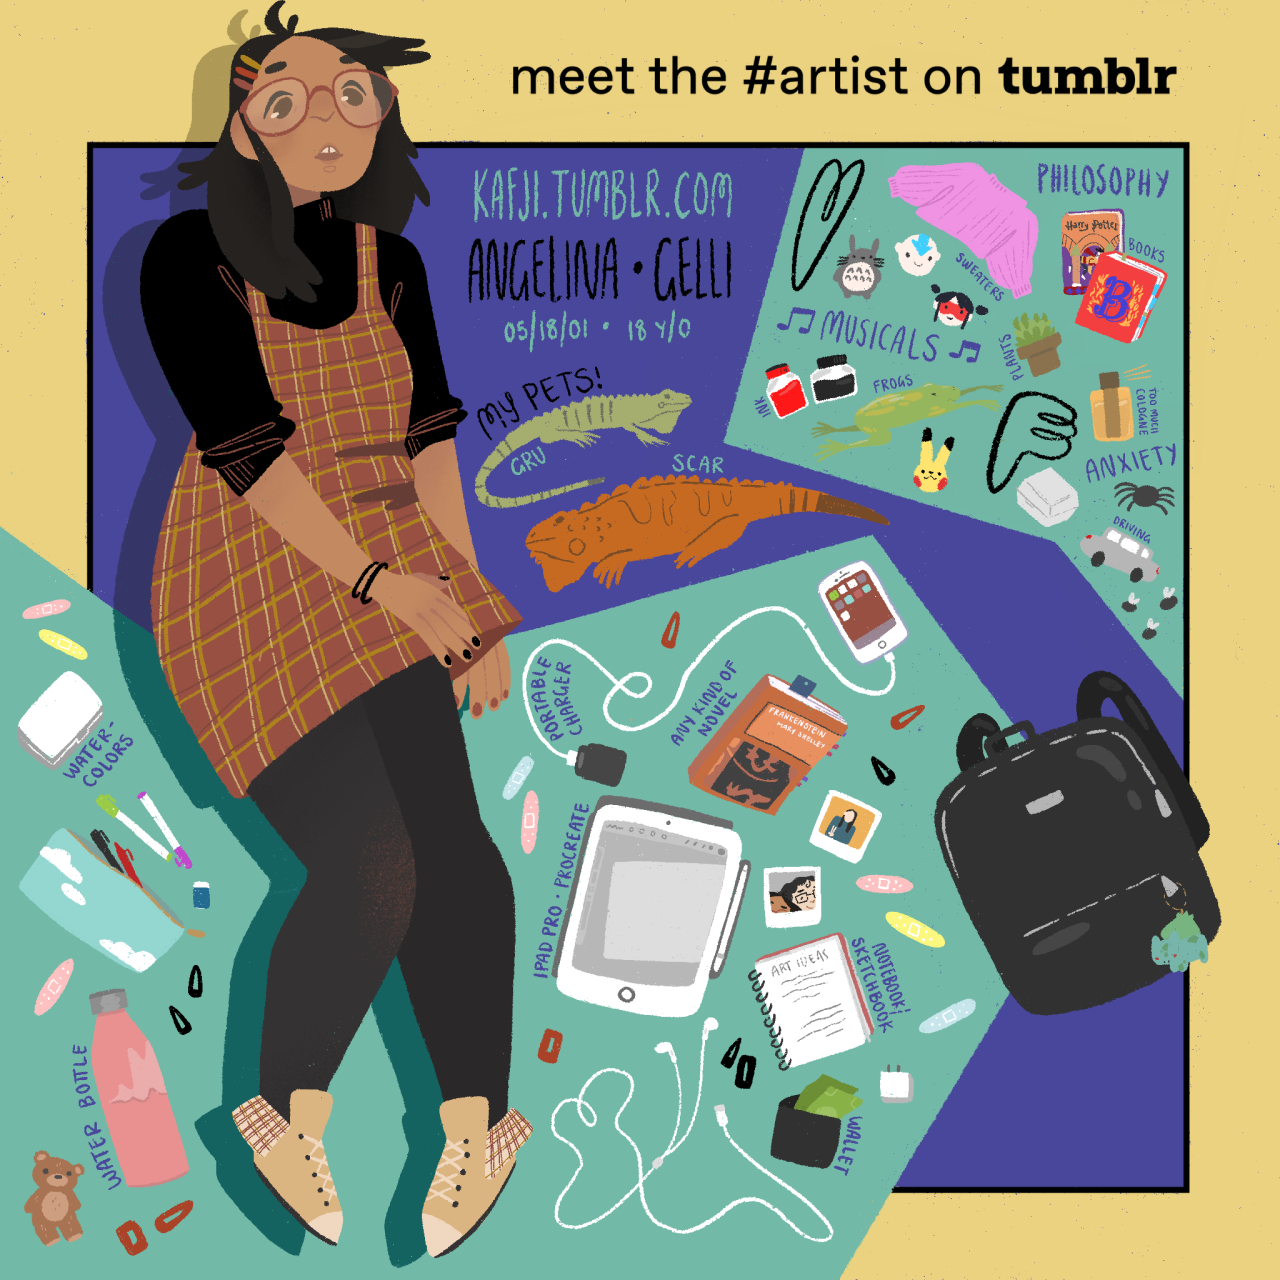 Meet the Artist: Angelina“Hello! My name is Angelina, but you can call me Gelli if you prefer! I’m an eighteen-year-old, multi-fandom artist, although I mostly post for ML. I’m going to college next fall to study English and philosophy, and plan to...